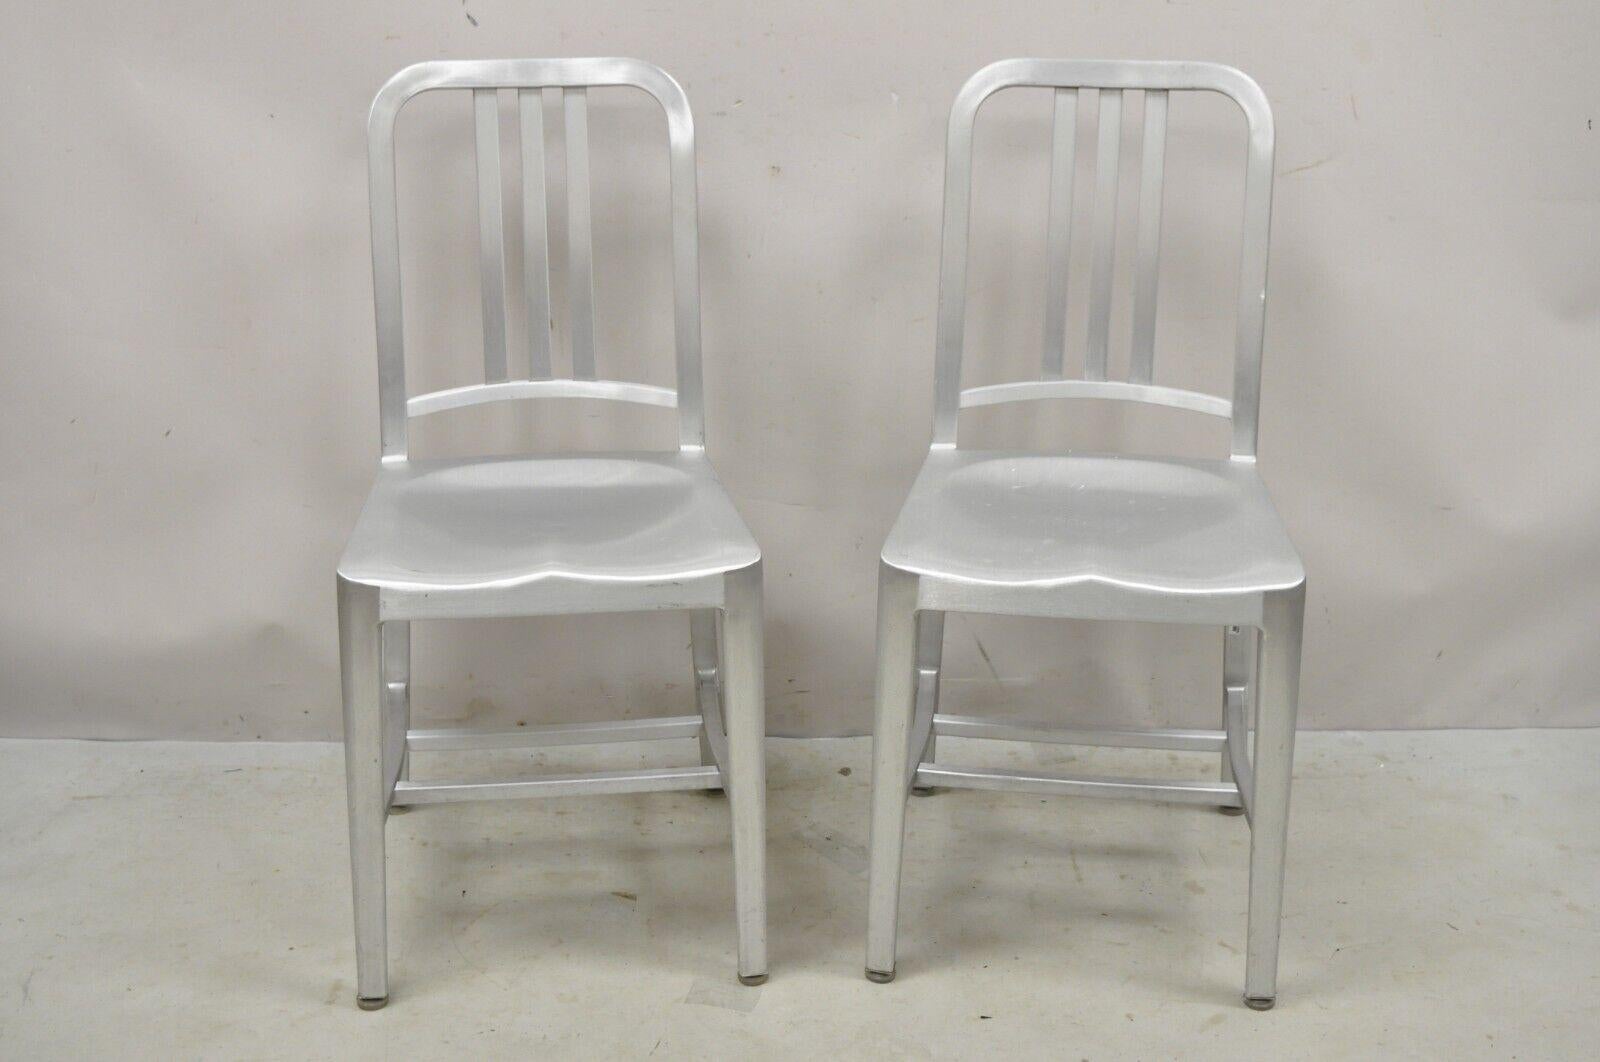 Emeco Navy Collection Brushed Aluminum Side Chair 1006 - A Pair. Item features aluminum construction, original labels, very nice vintage item, quality American craftsmanship, great style and form. circa 21st Century, Pre-Owned. Measurements: 34